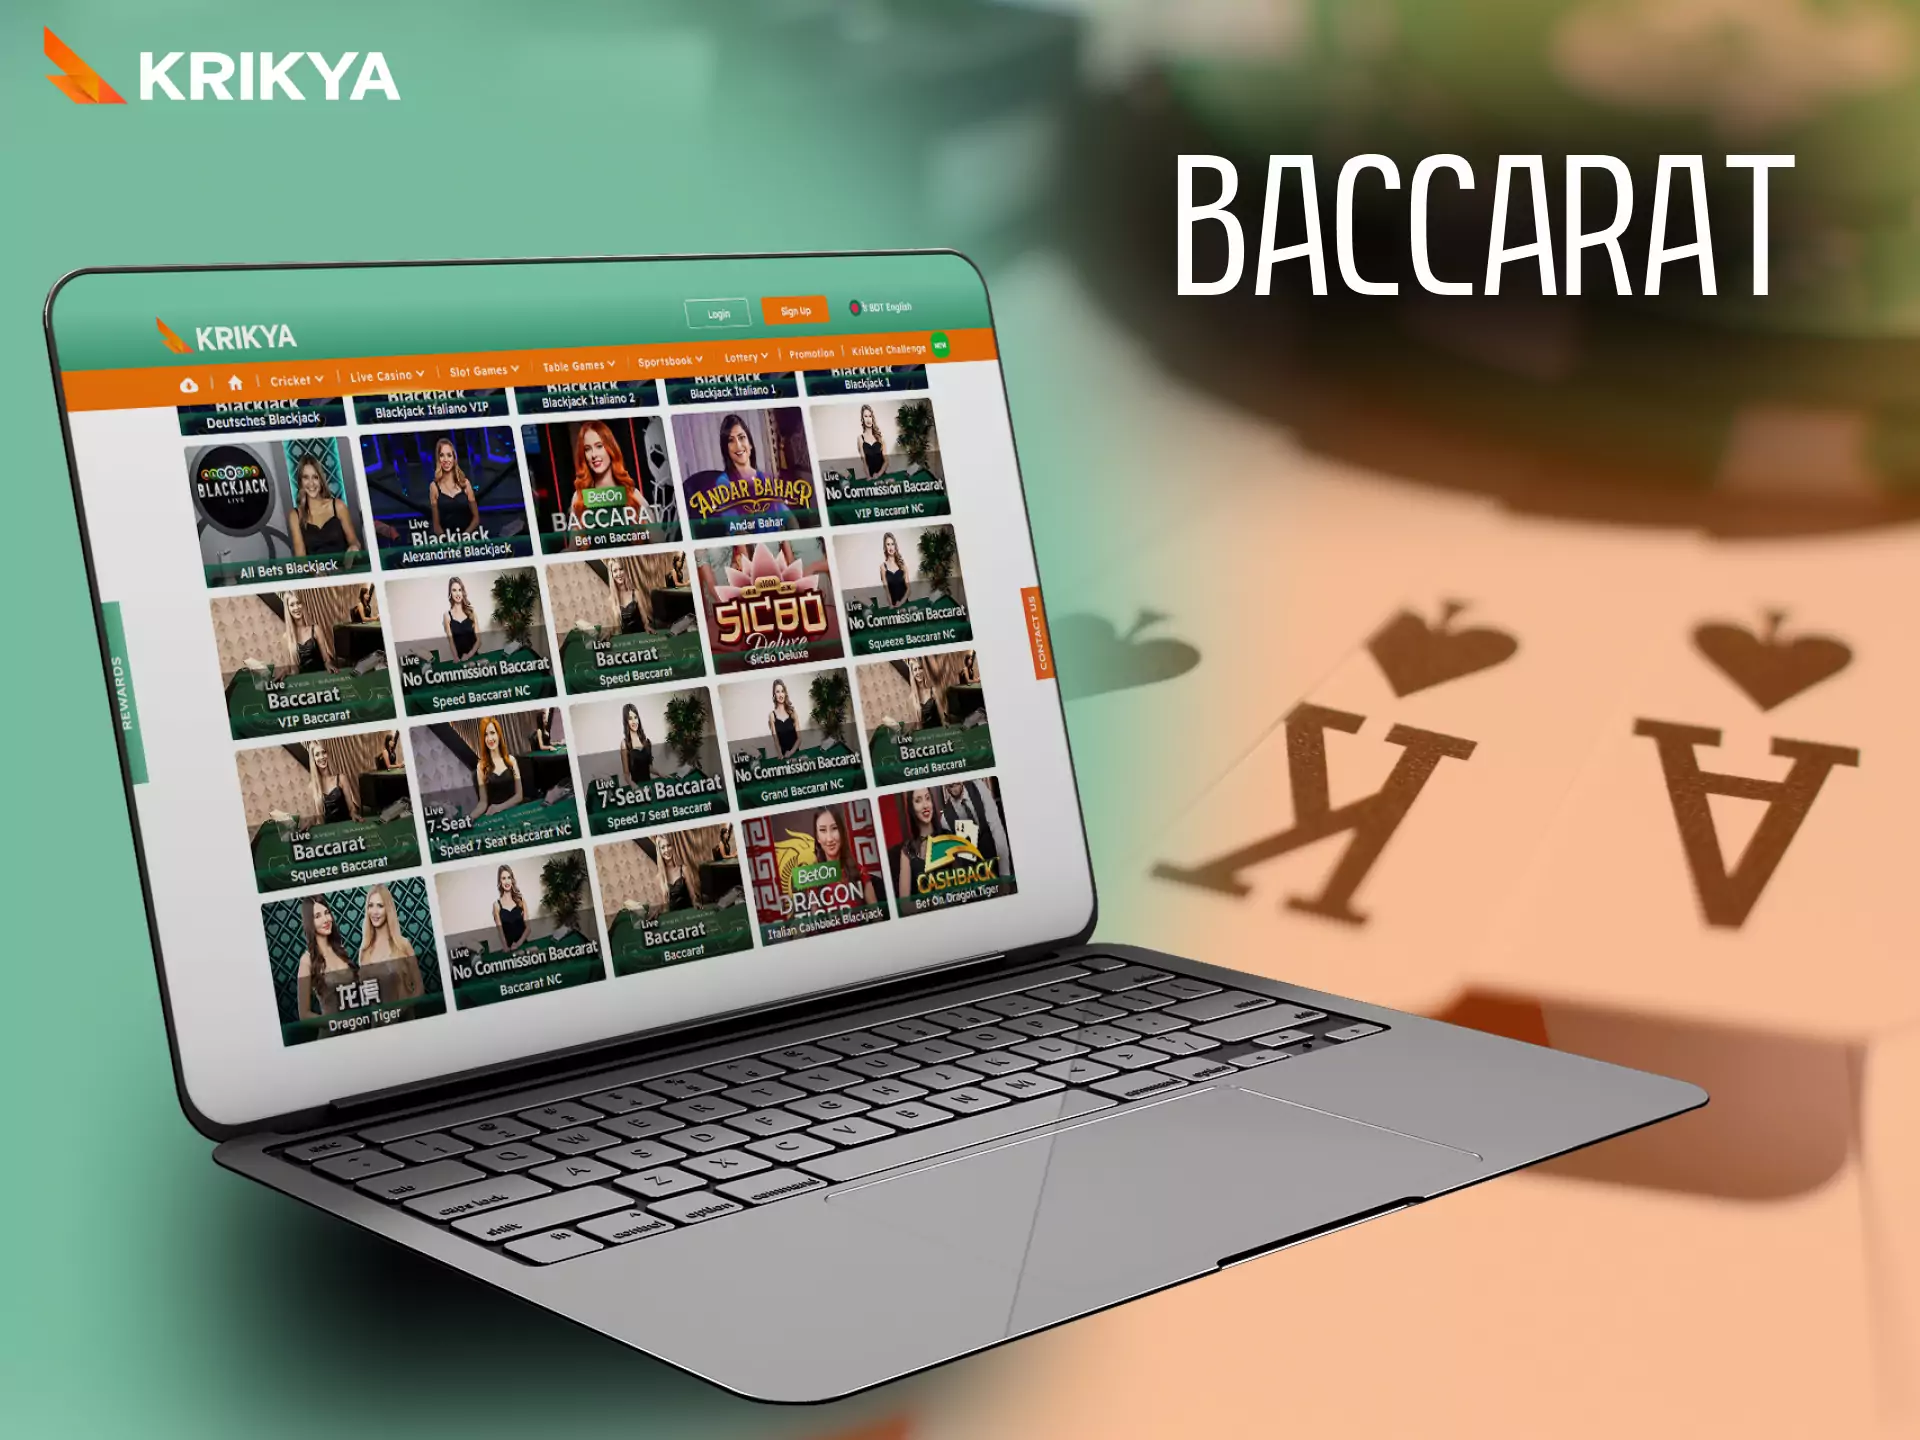 Krikya offers users to play baccarat.